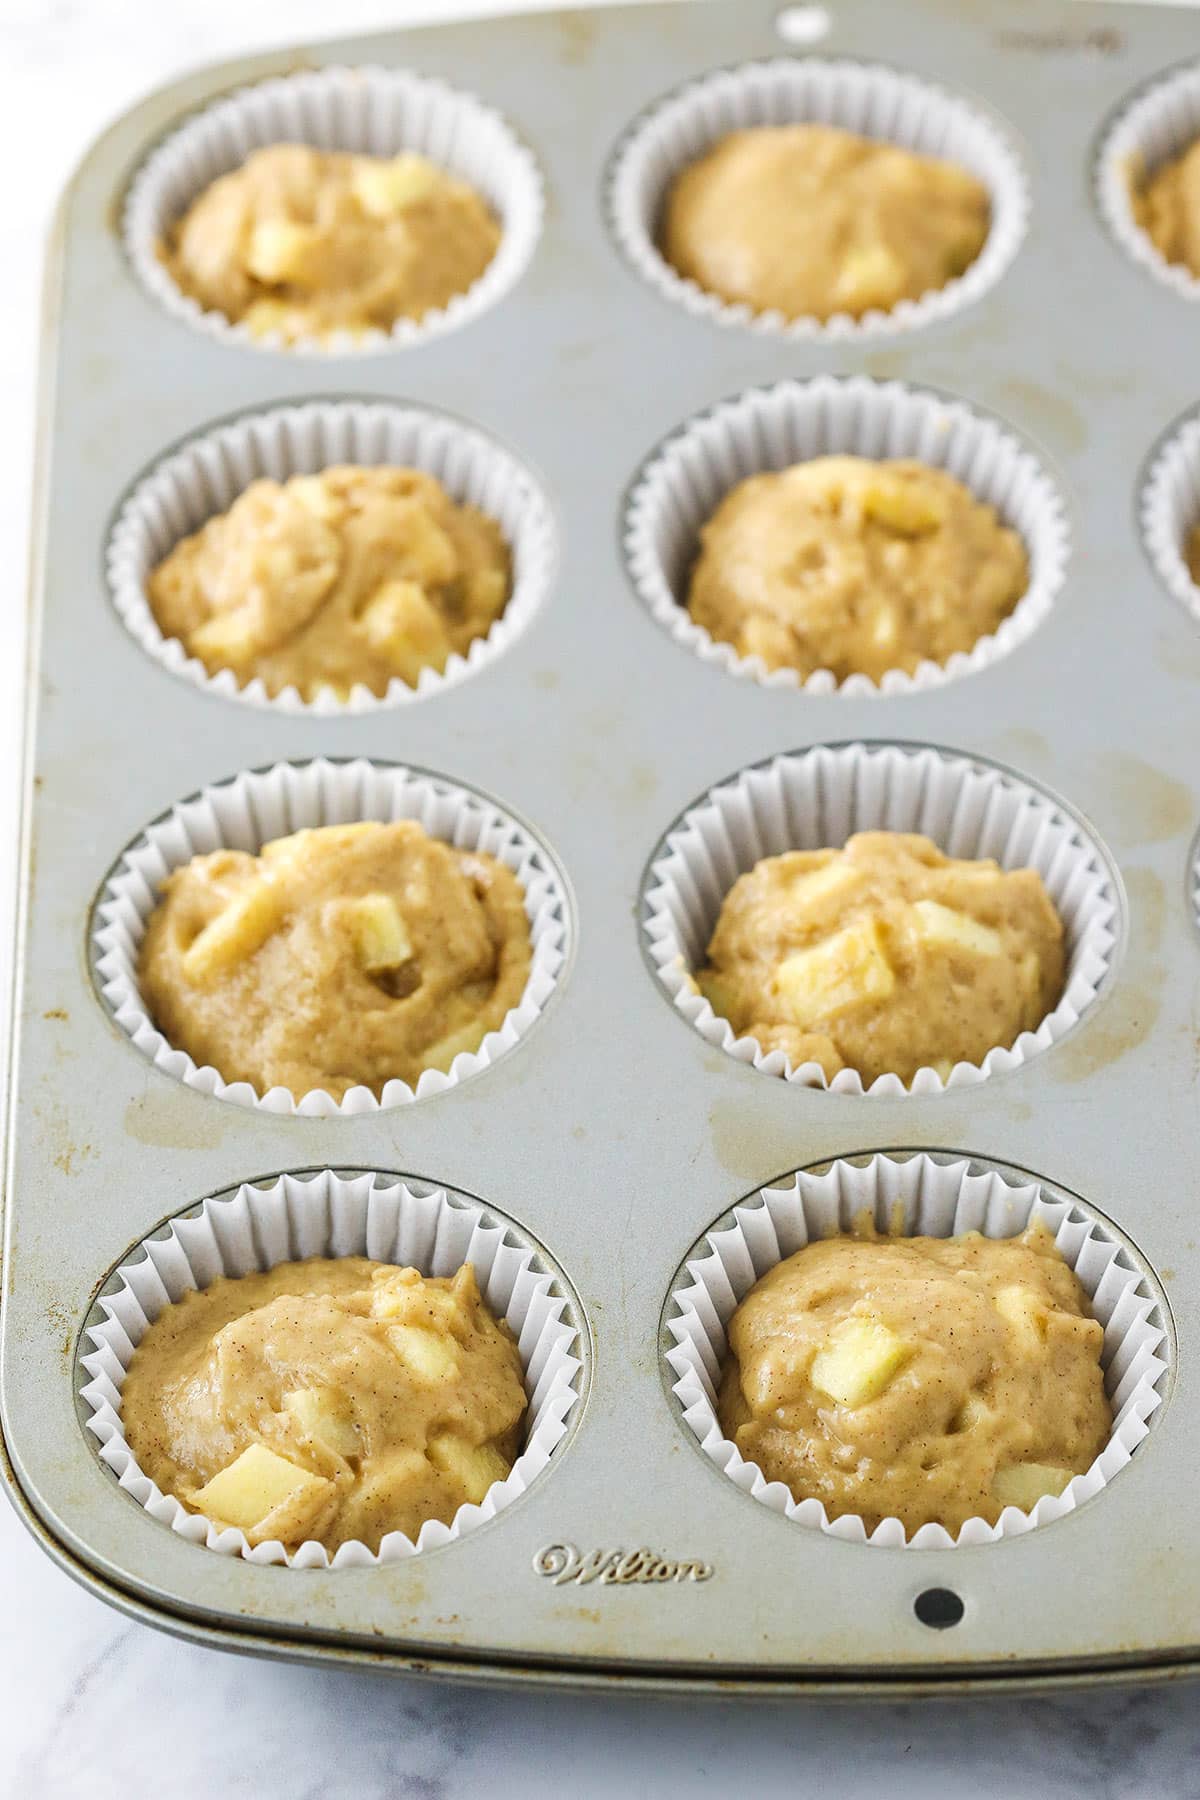 unbaked apple muffins without streusel in the muffin pan